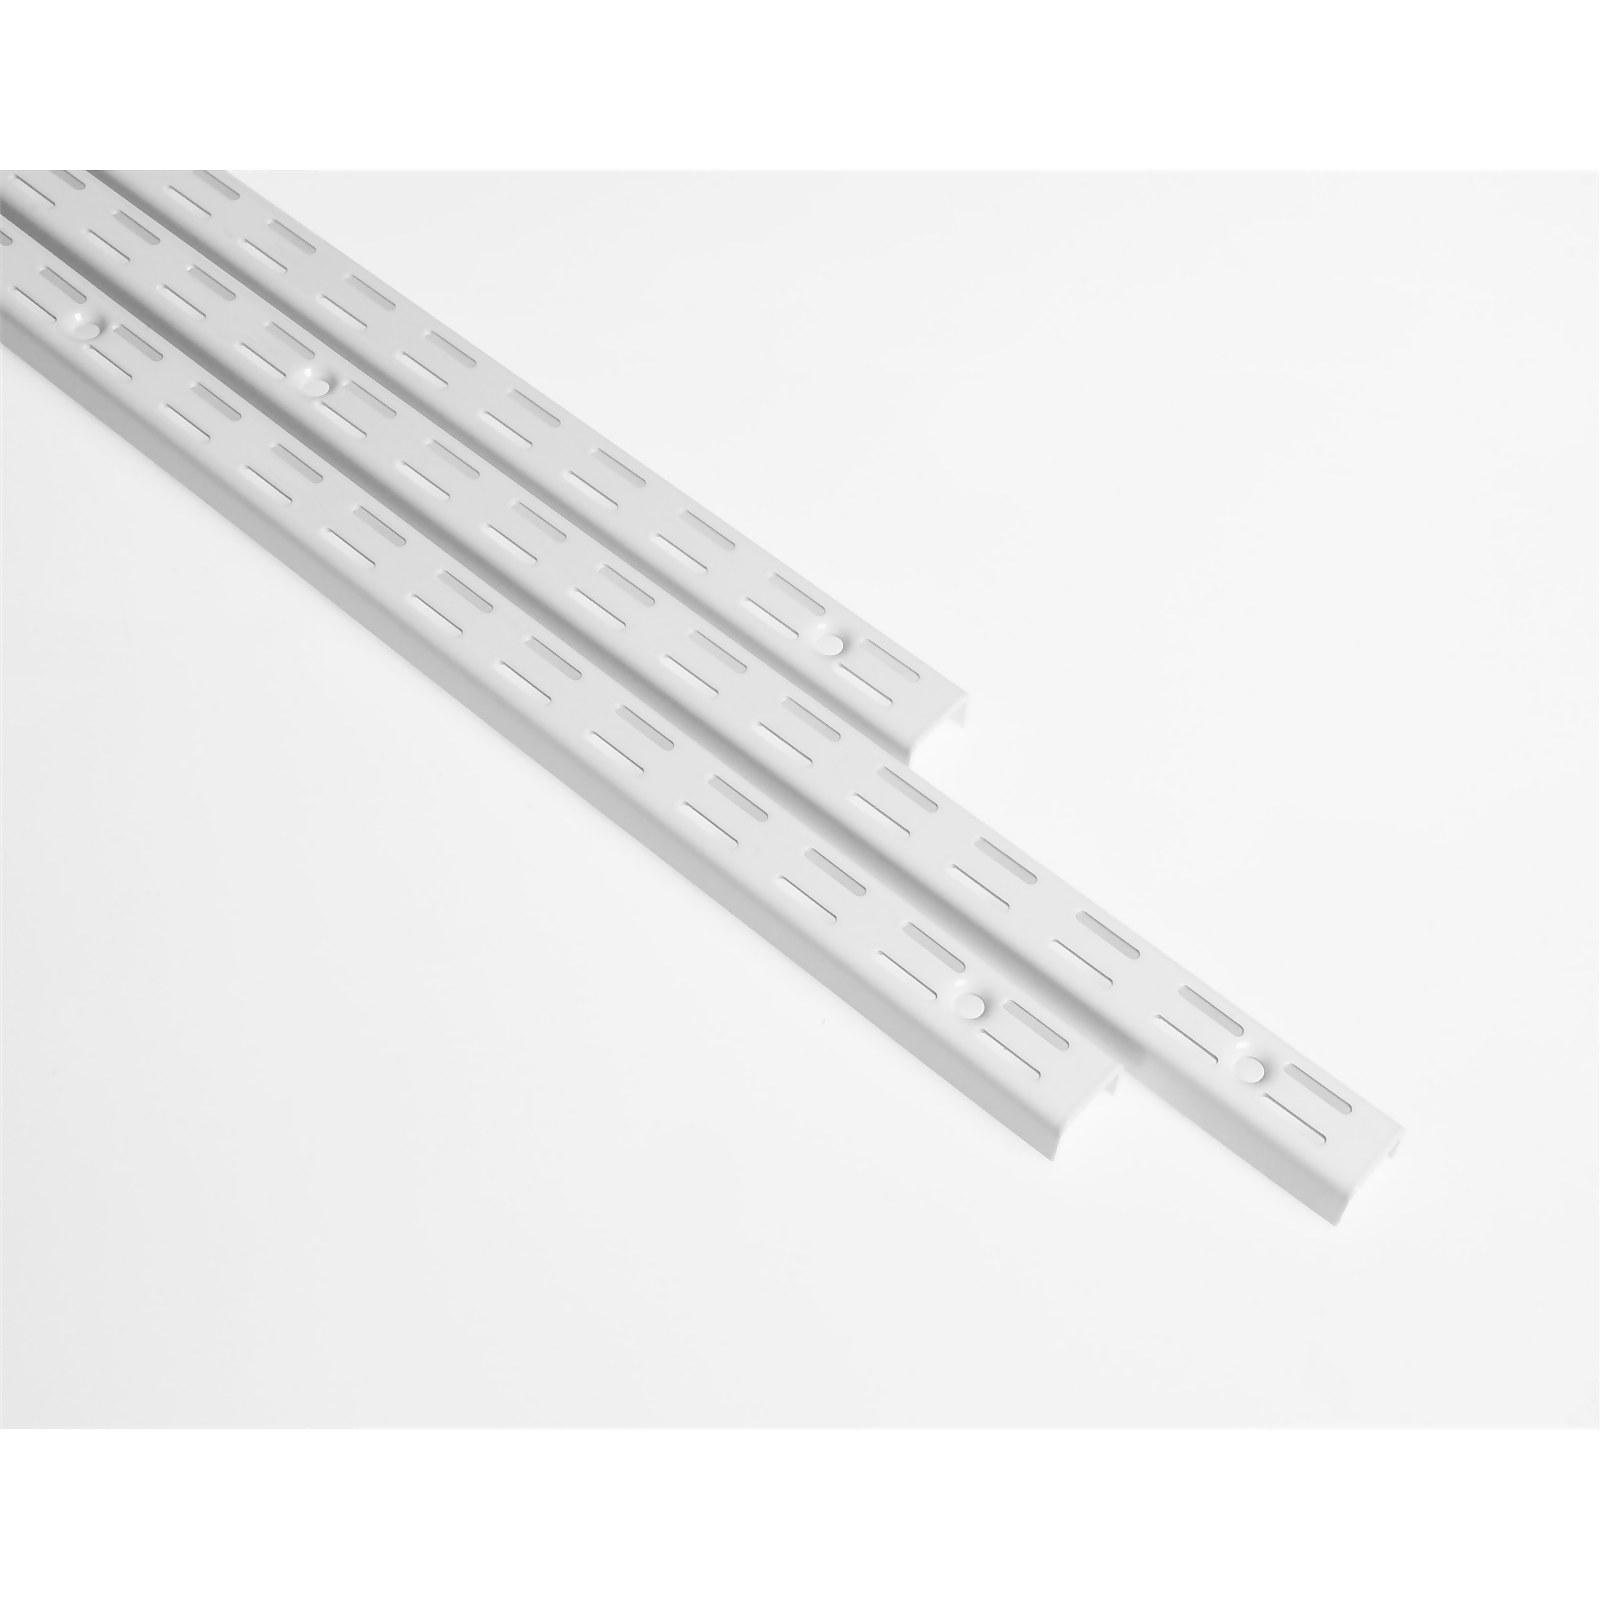 Photo of Anti-bacterial Twin Slot Shelving Kit - 1981mm White Twinslot And 120mm Brackets - White